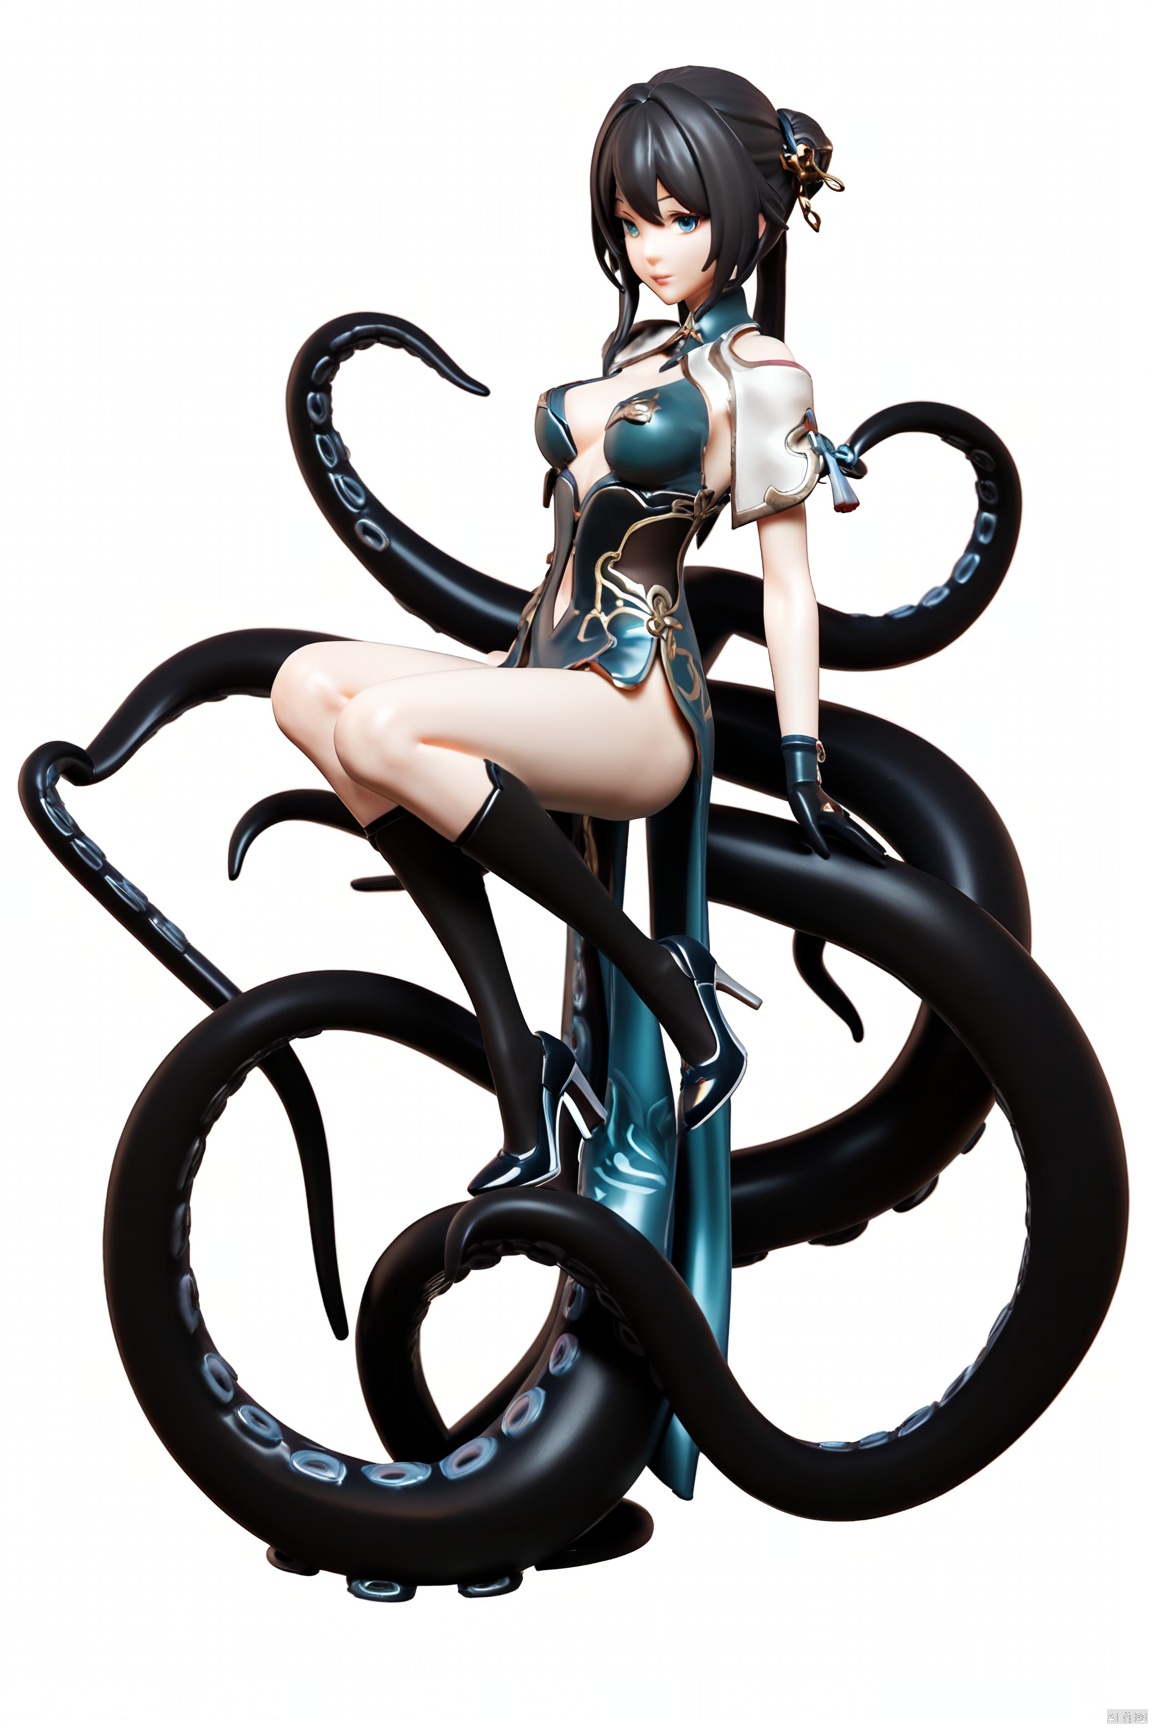  score_9, score_8_up, score_7_up, score_6_up, , 
ruanmei, def clothe, 1girl, gloves, blue eyes, black hair, dress, high heels, chinese clothes, breasts,
jijia, 3d,CG,PVC, Brachiopods, Octohuman, 1girl, tentacles, skirt, solo, monster girl, suction cups, no feet,full body, monochrome, simple background, white background, 
